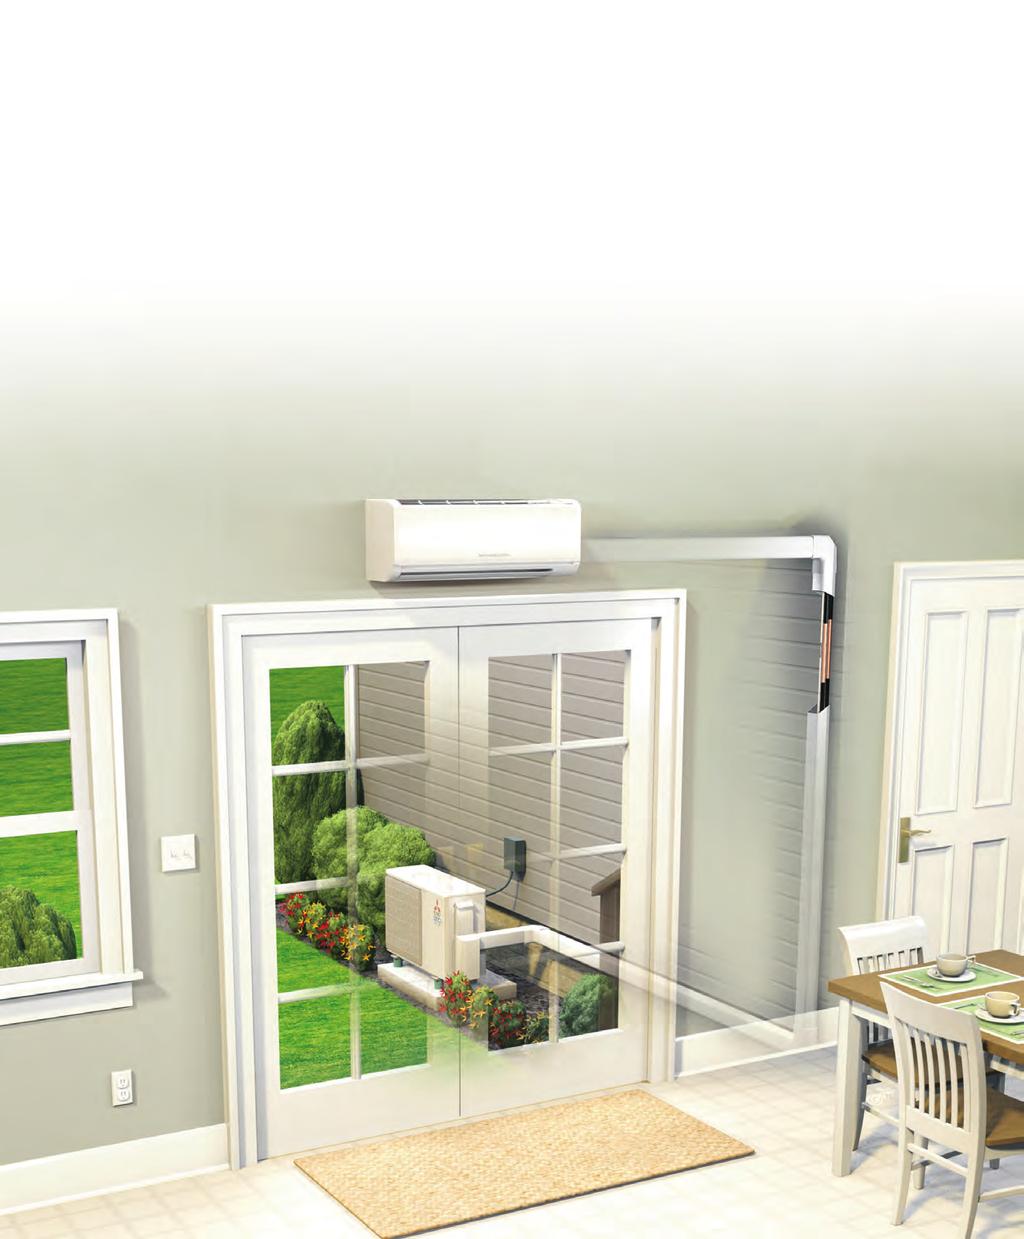 HOW OUR DUCTLESS SYSTEM WORKS Ductless systems pump cooled or heated refrigerant directly to wall- or ceiling-mounted air-handling units through small lines.